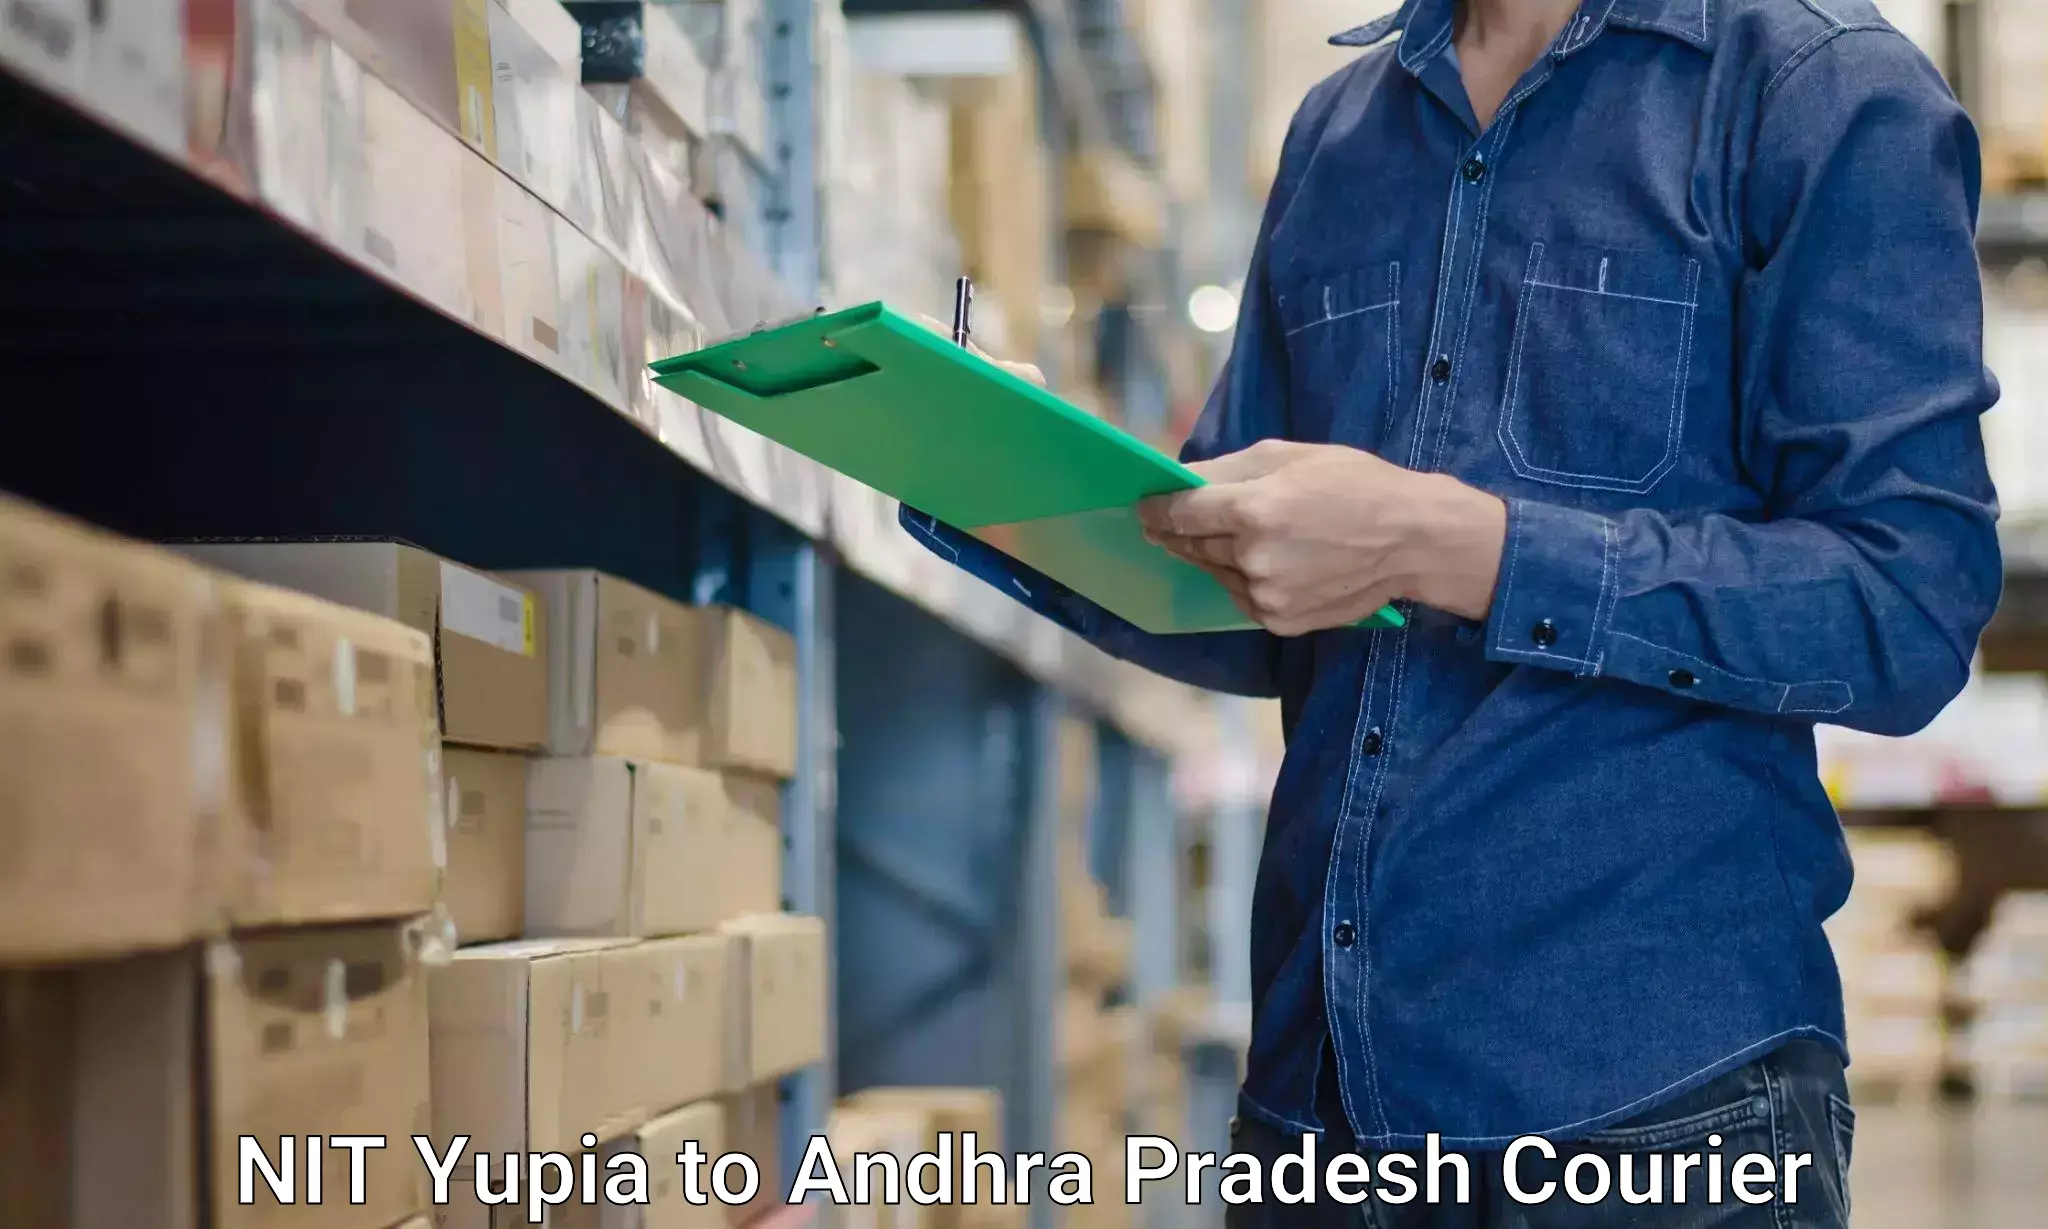 Professional movers and packers NIT Yupia to Changaroth